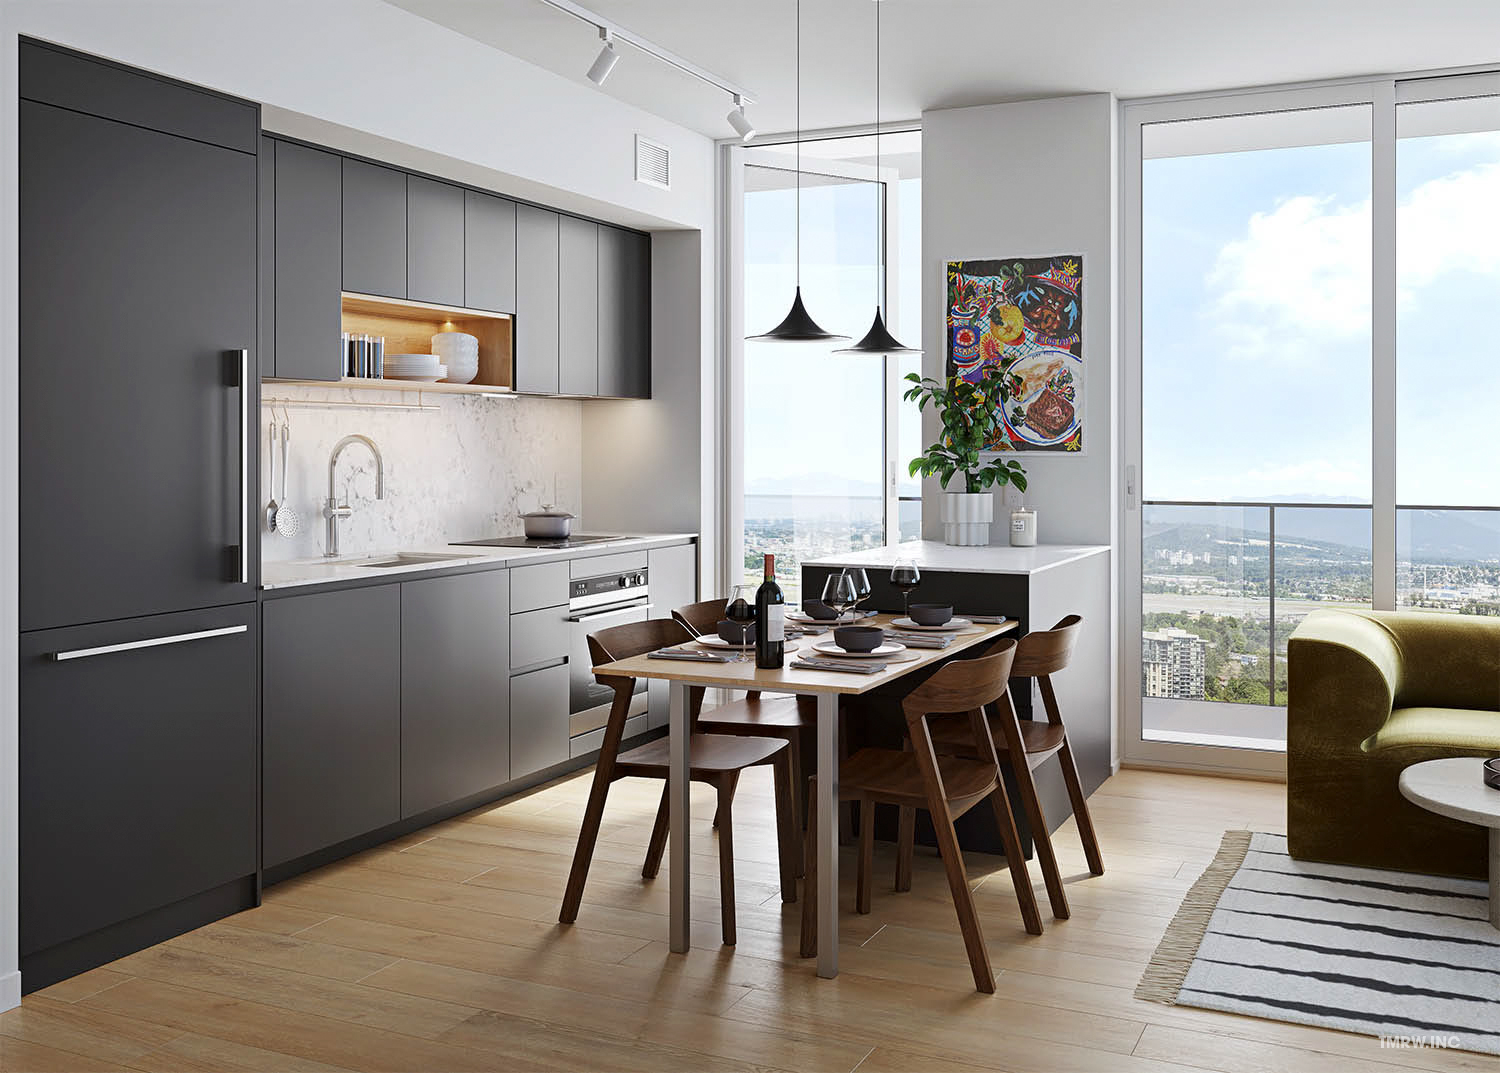 Architectural visualization of Parkway for Bosa, an interior view of a kitchen in the daylight.